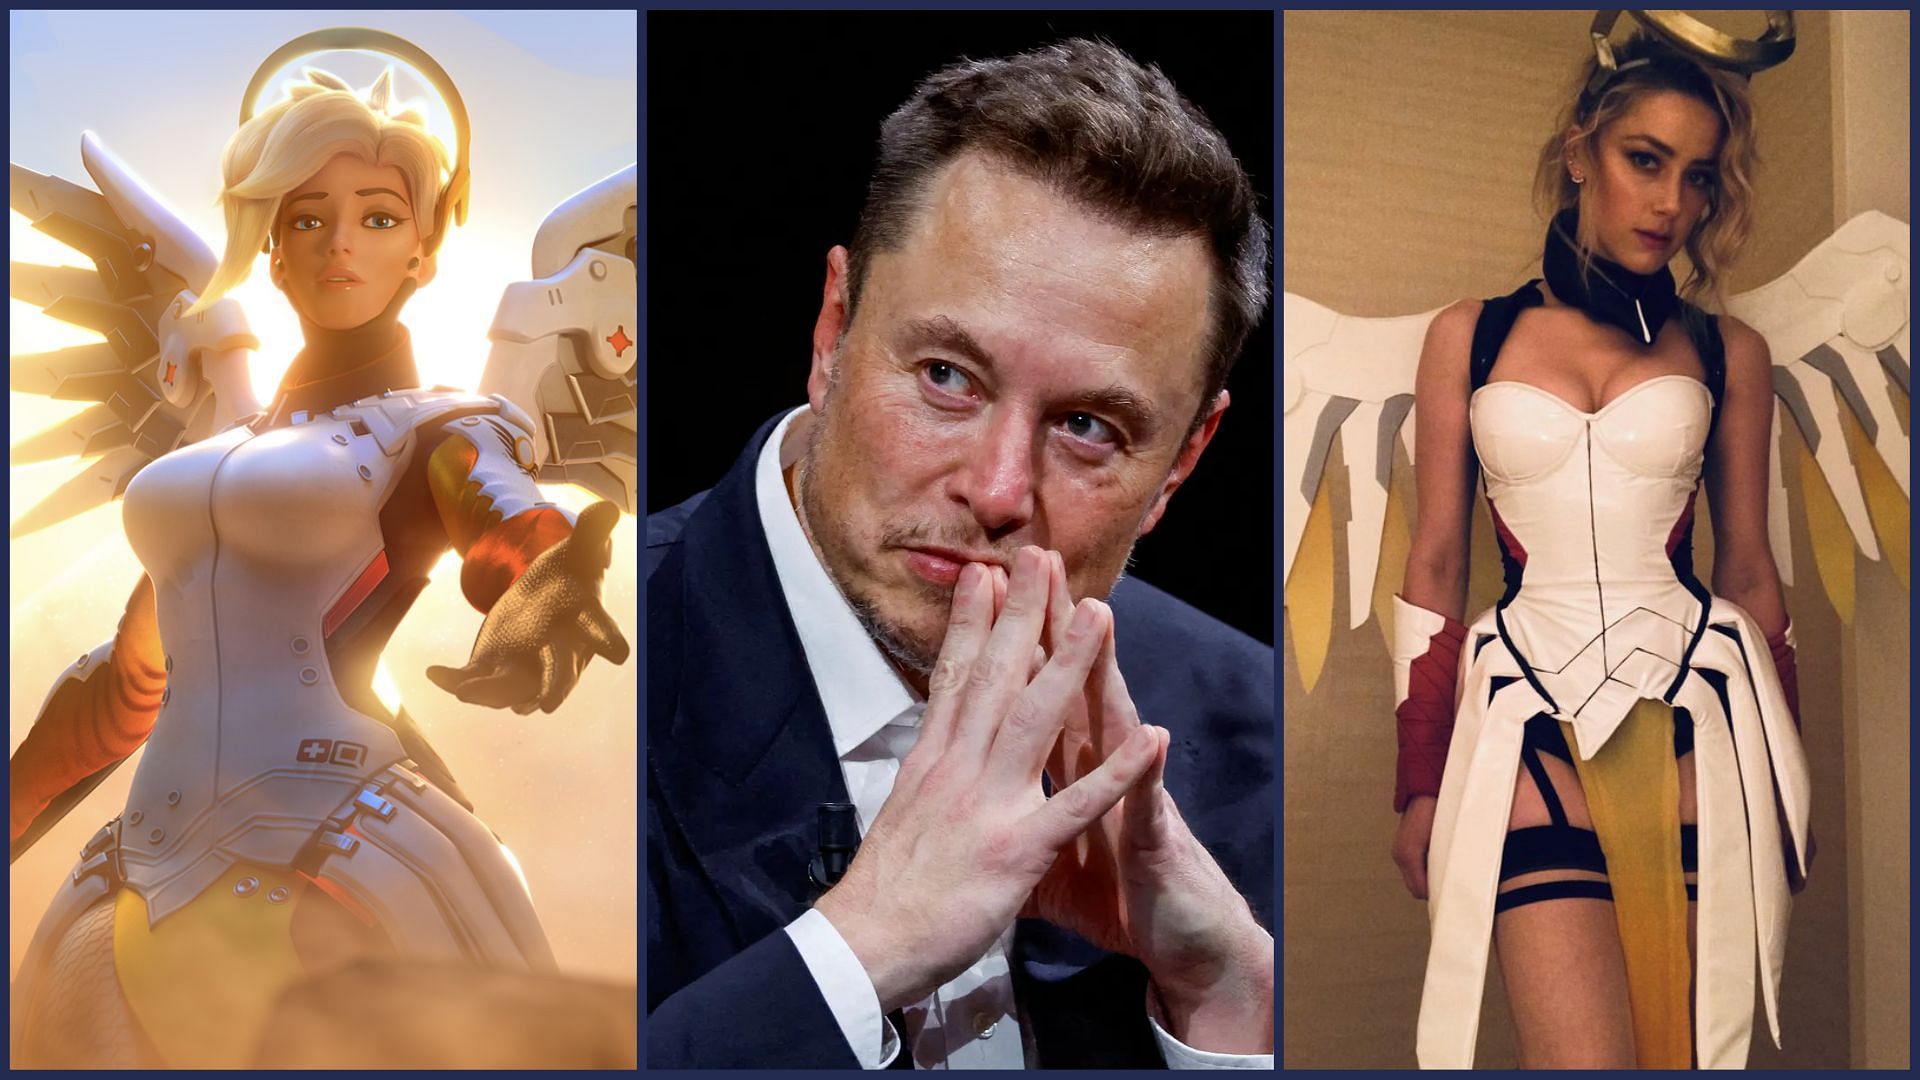 (Left to right): Mercy, Elon Musk and Amber Heard as Mercy. (Images via X/@elonmusk)